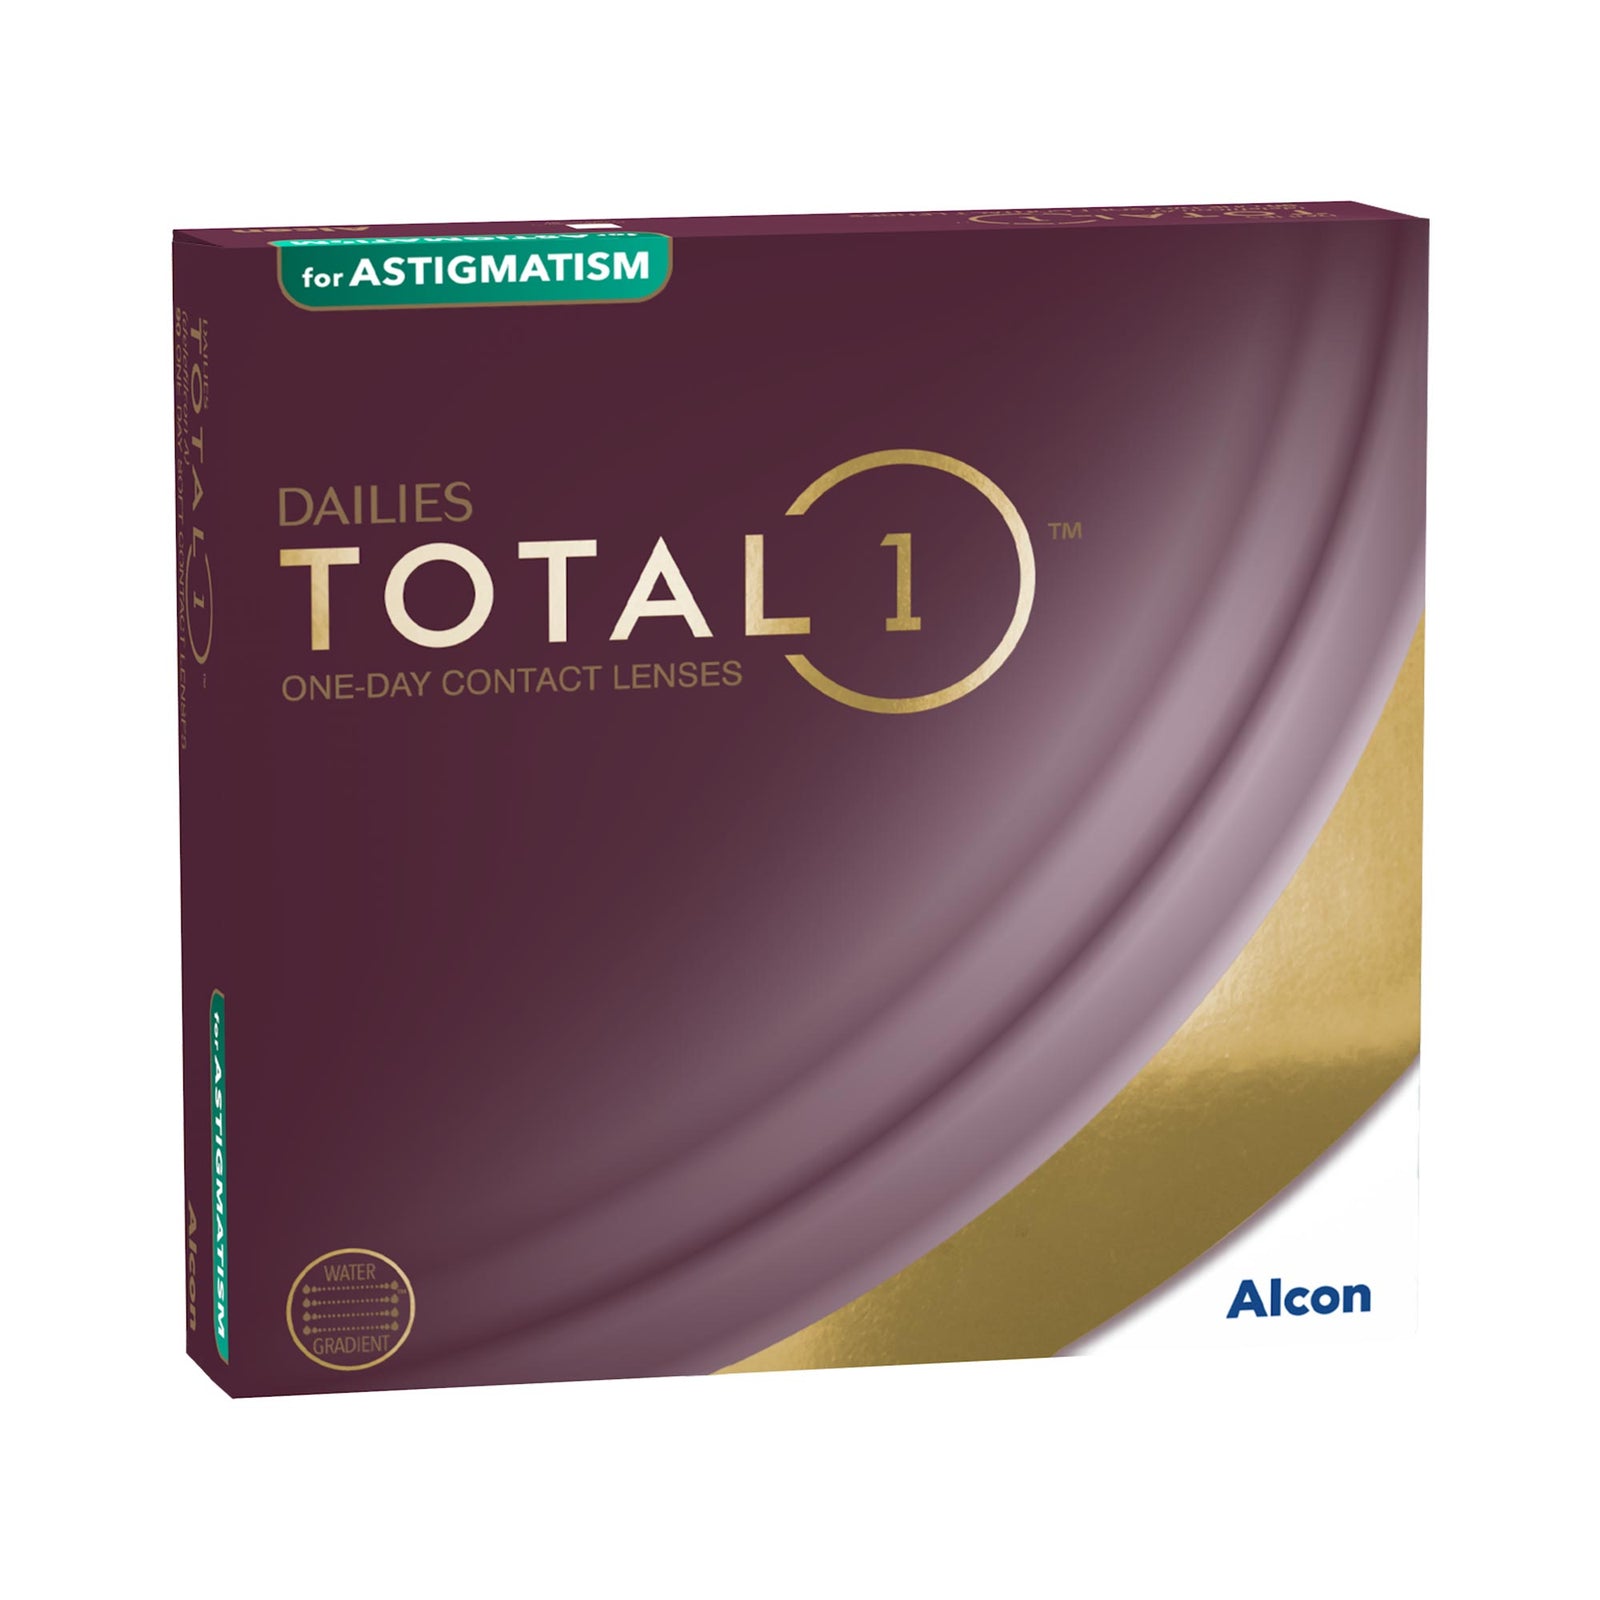 DAILIES : TOTAL1™ for Astigmatism Contact Lenses – Daily 90 pack